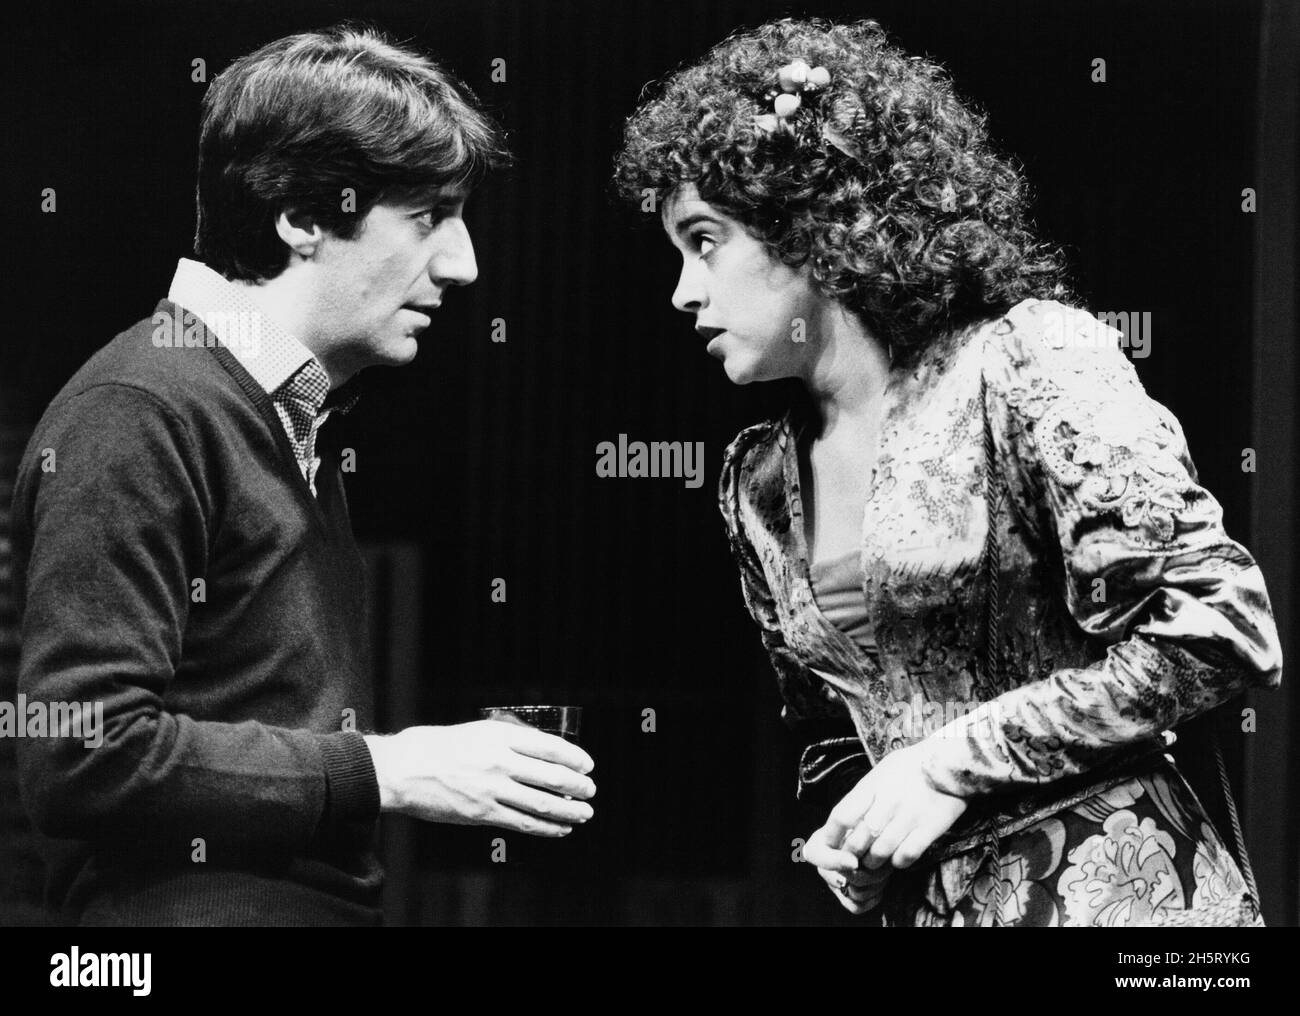 Carole bayer sager and marvin hamlisch Black and White Stock Photos ...